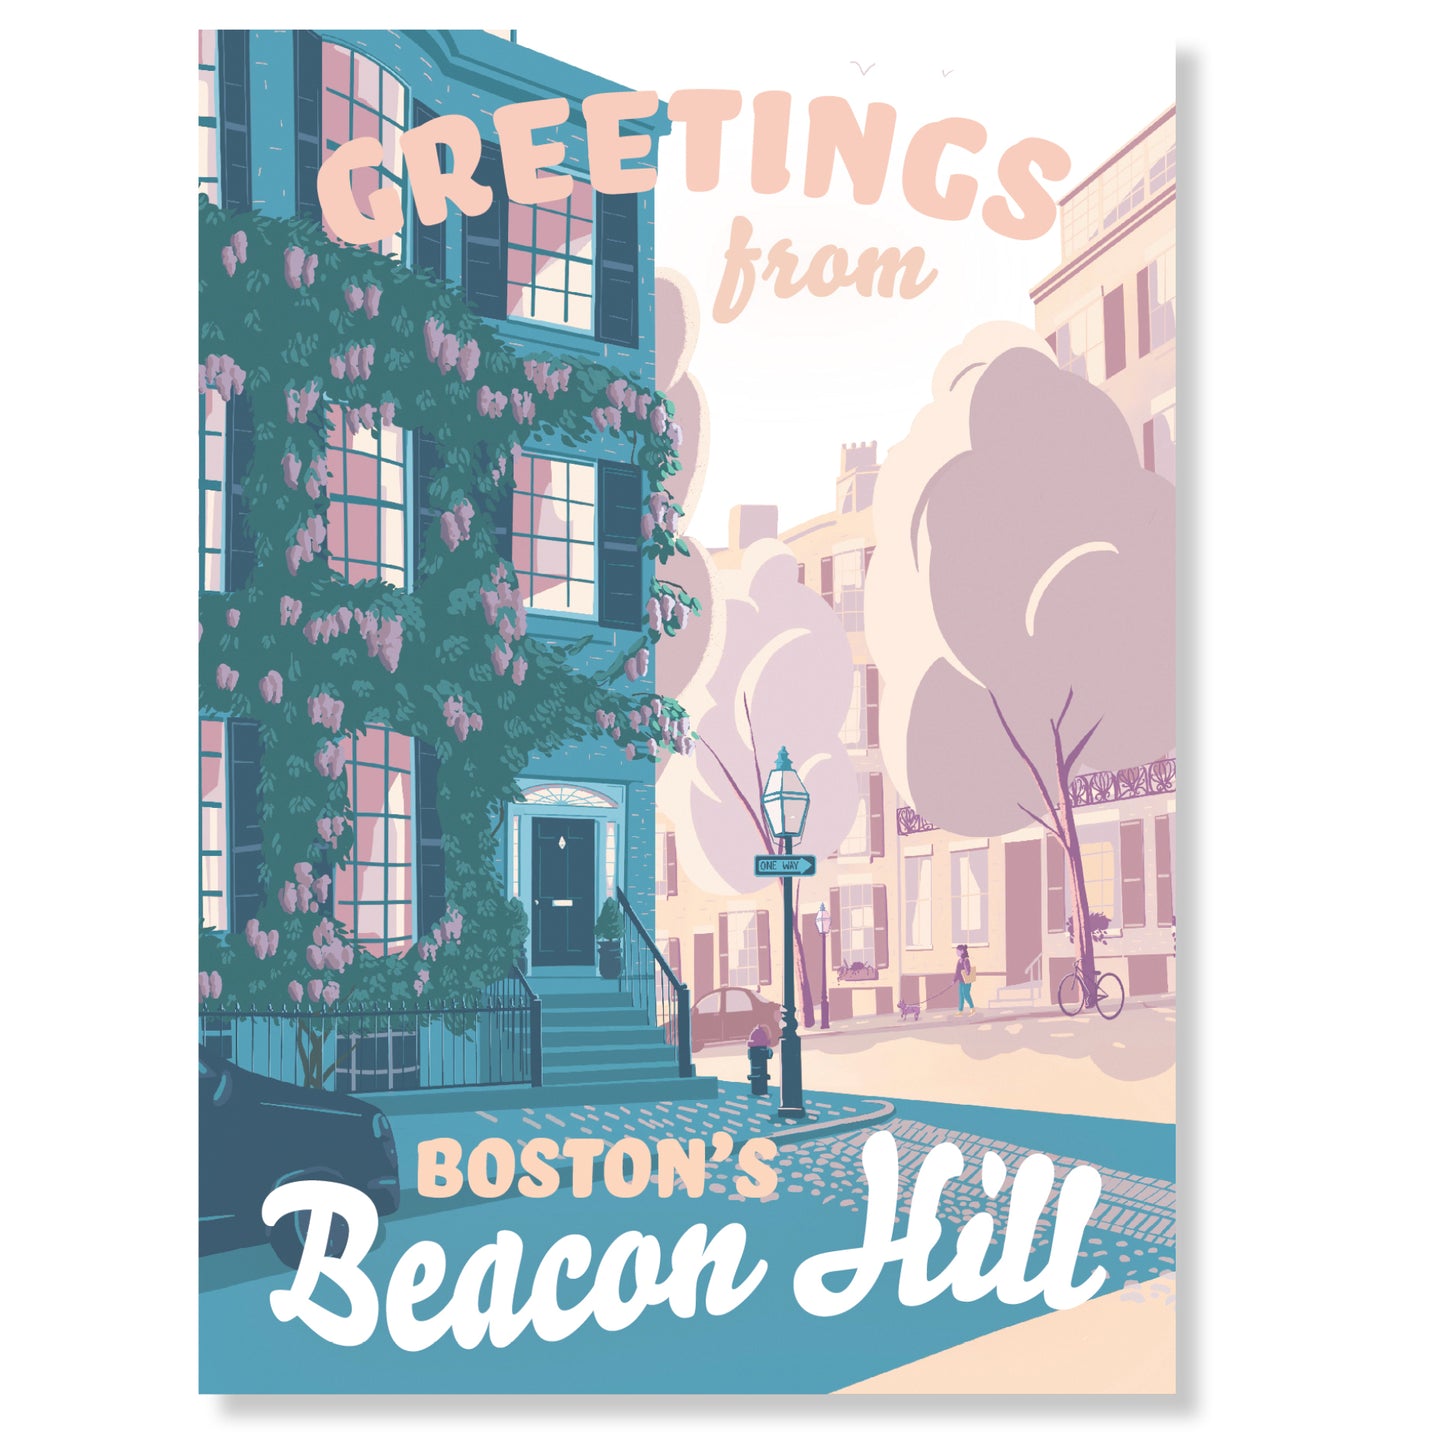 "Greetings from Boston's Beacon Hill" Postcard